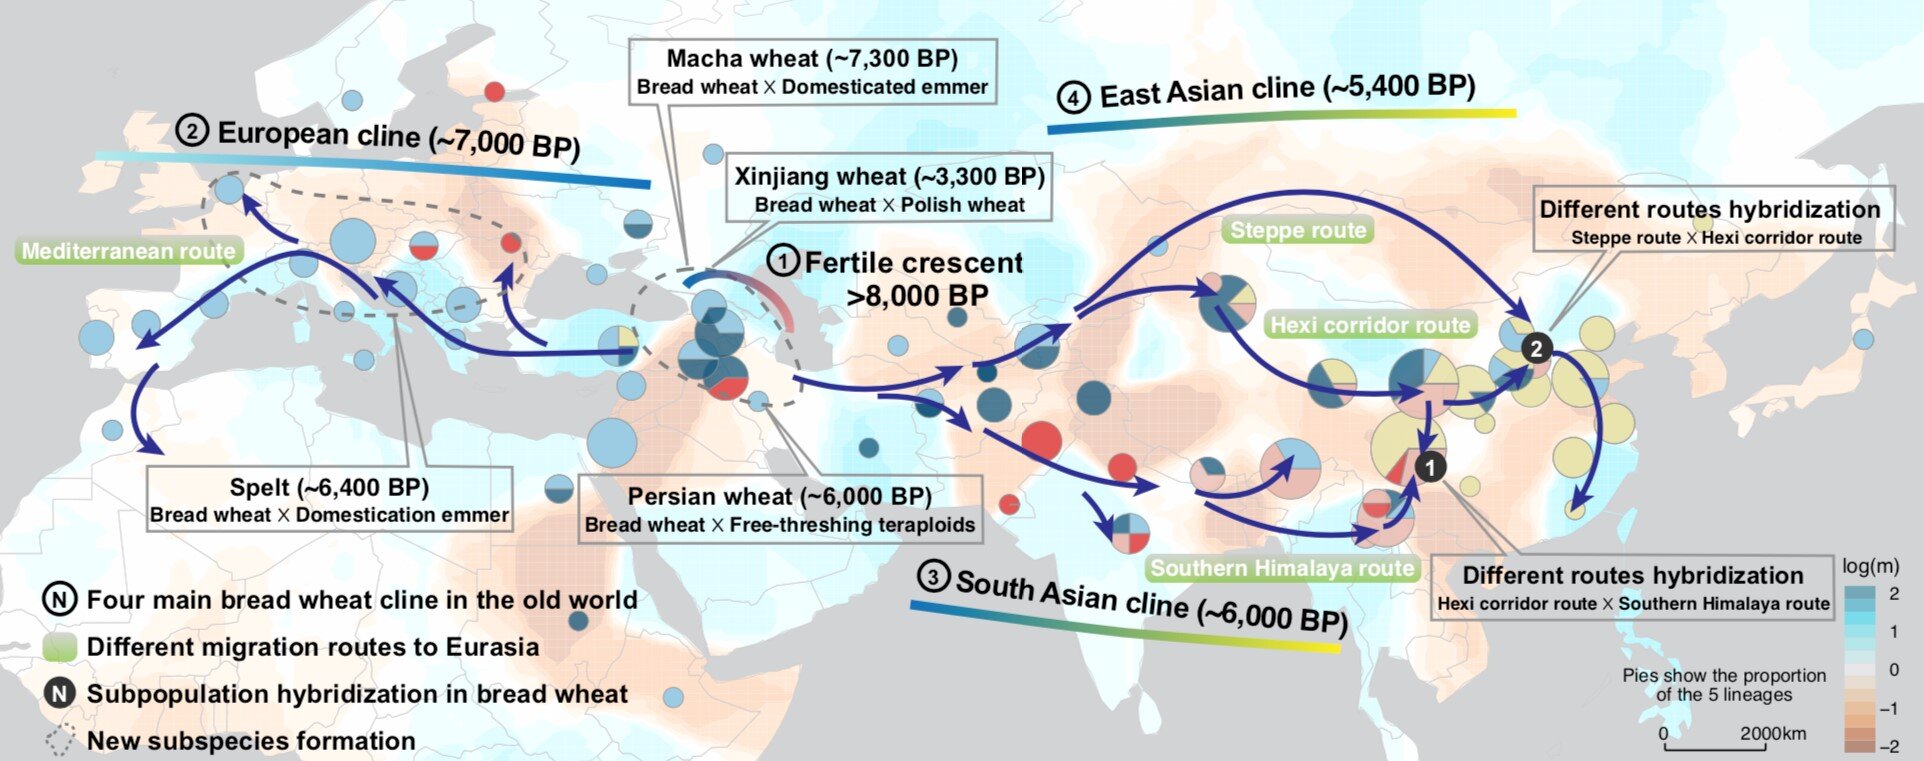 Demographic modeling plays back tape of wheat evolution